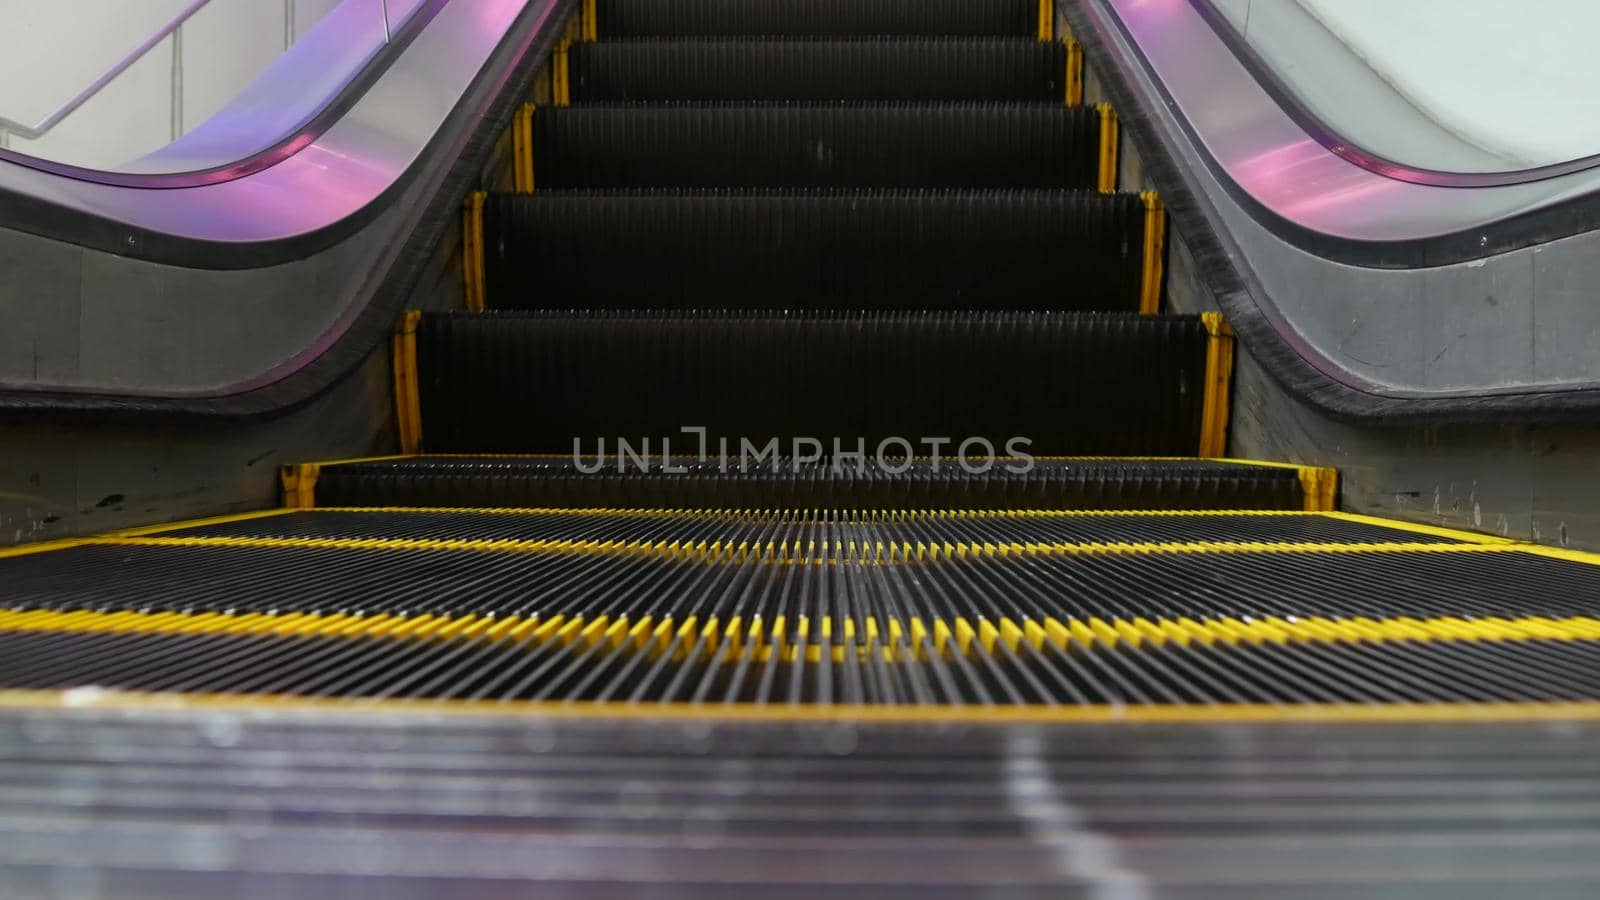 Low angle looped perspective view of modern escalator stairs. Automated elevator mechanism. Yellow line on stairway illuminated with purple light. Futuristic empty machinery staircase moving straight.